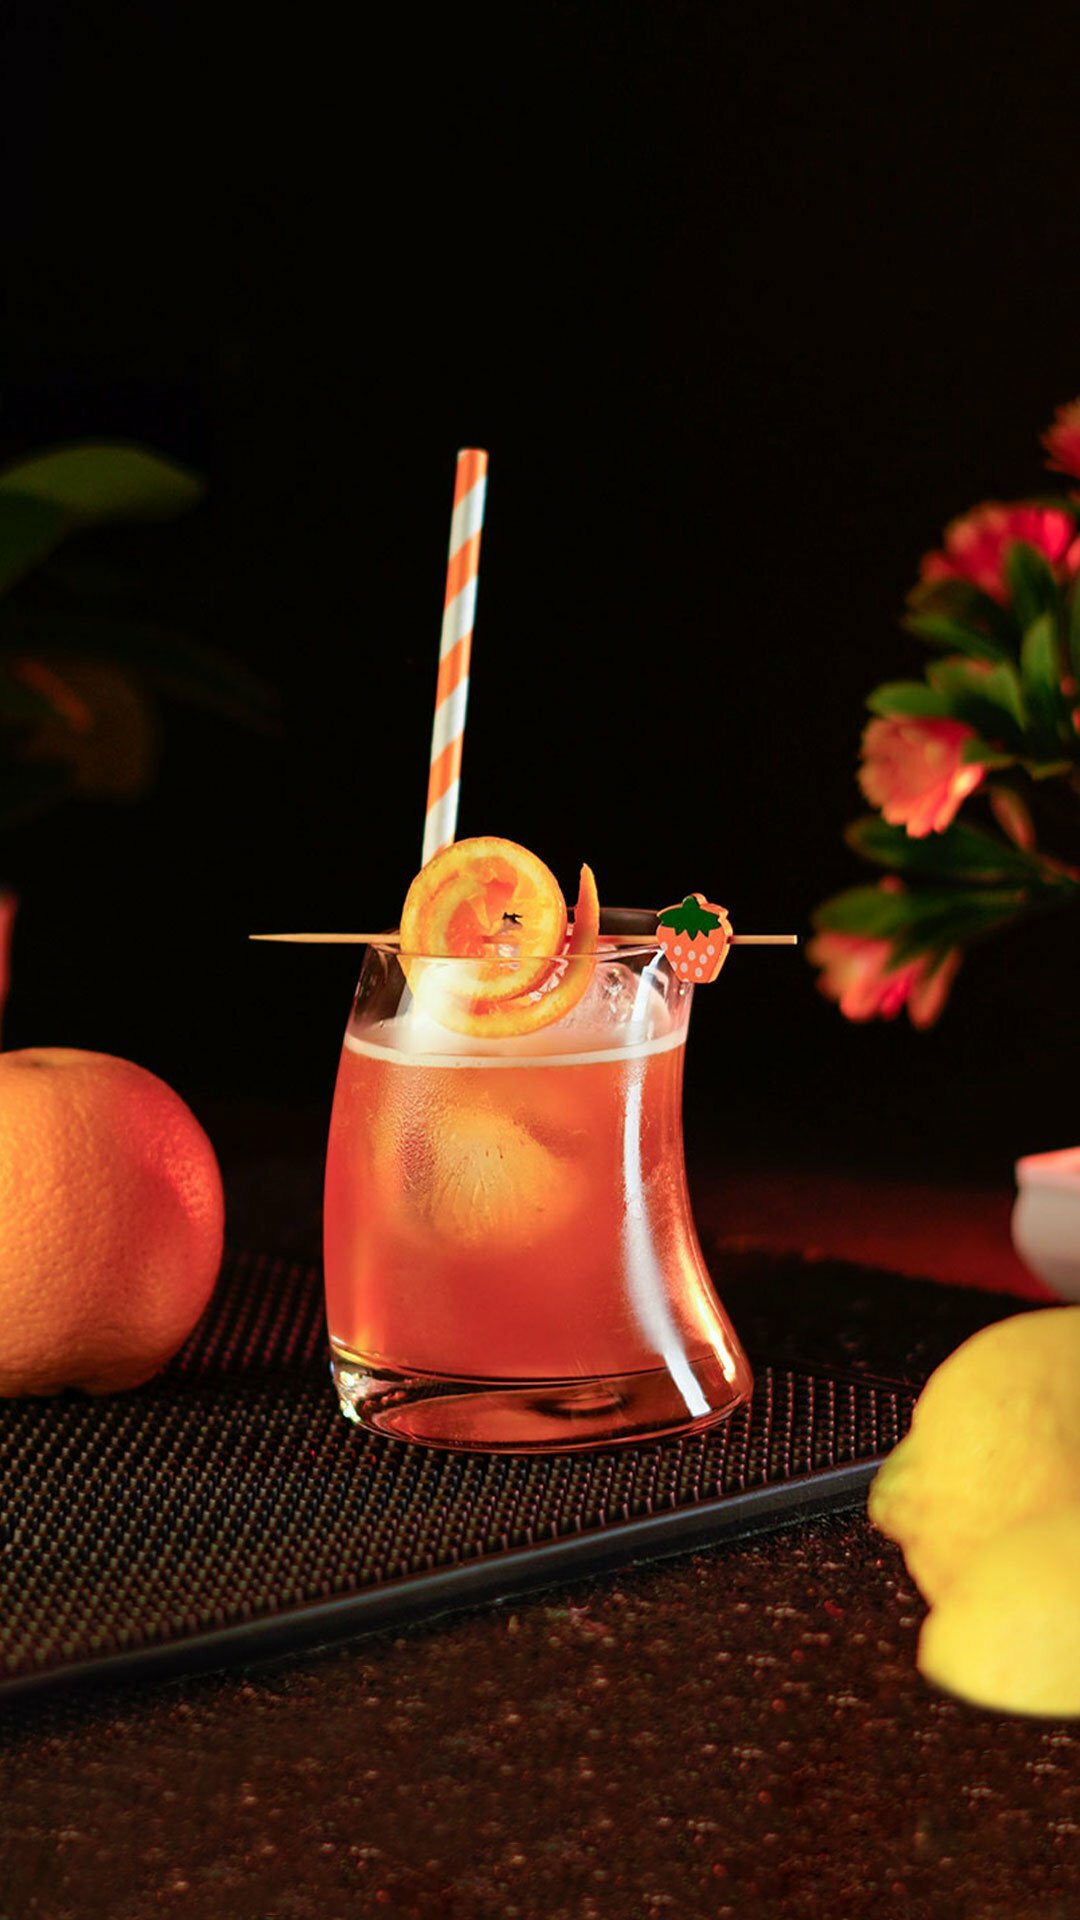 Orange cocktail inside a hunched short glass garnished with an orange peel on a cocktail pick